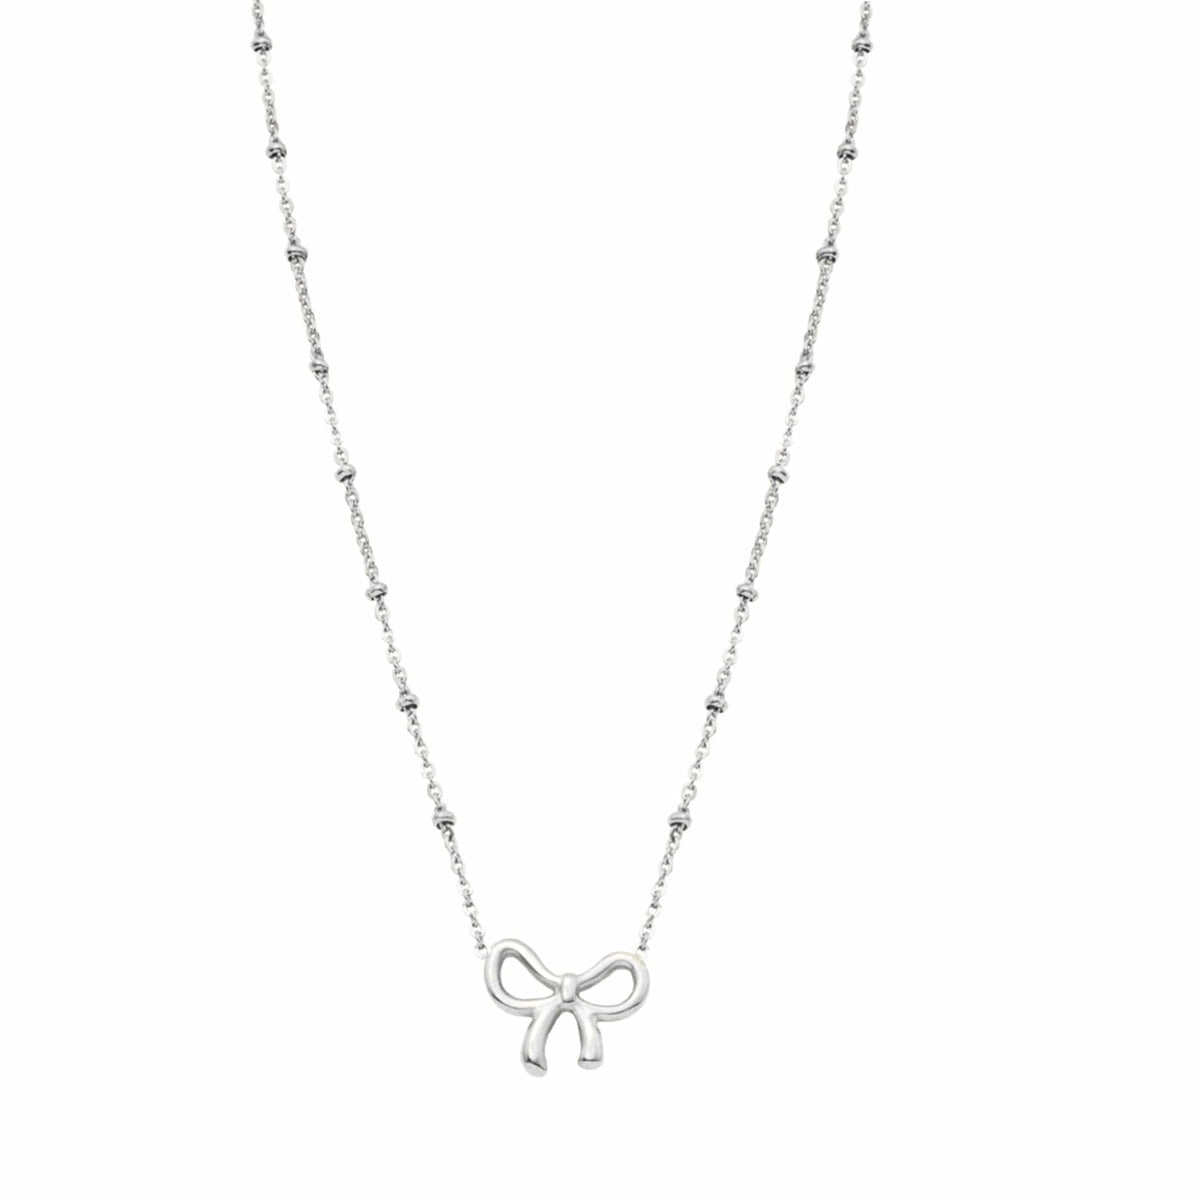 BohoMoon Stainless Steel Lyla Bow Necklace Silver